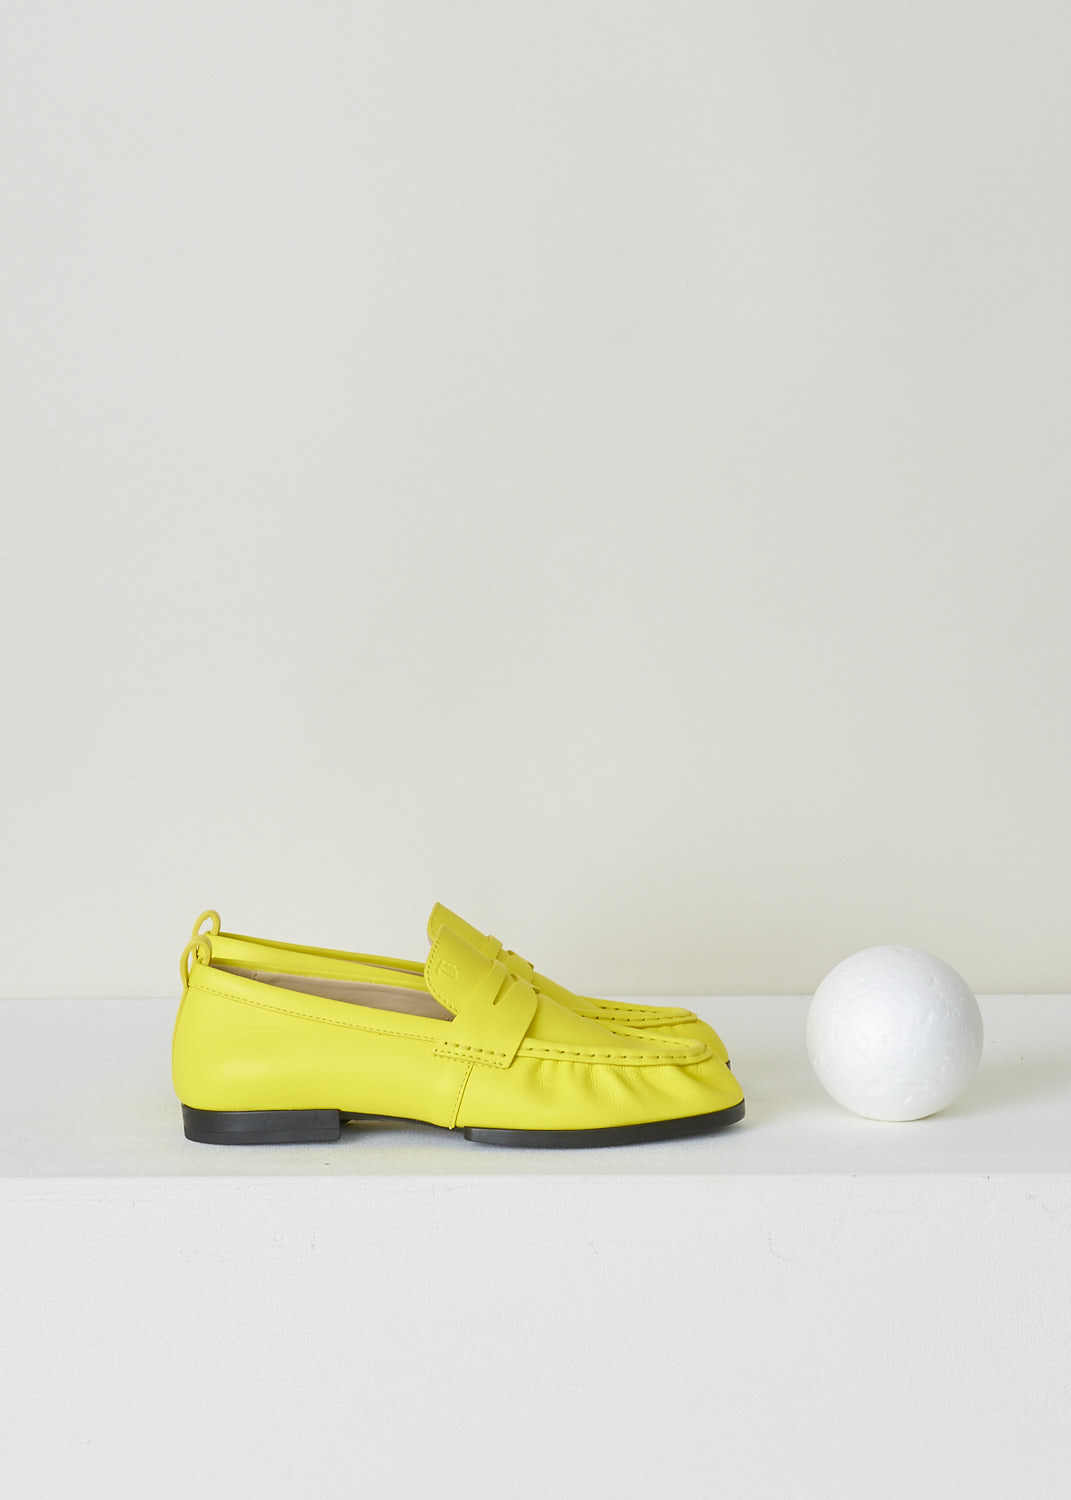 TODS, BRIGHT YELLOW PENNY LOAFERS, XXW02E0EC60PHXG009_PHX_HOLIDAY, Yellow, Side, These bright yellow slip-on penny loafers have a rounded toe and a decorative slotted leather strip over the upper side. Around the trim, the leather is subtly pleated. These loafers have black soles.
